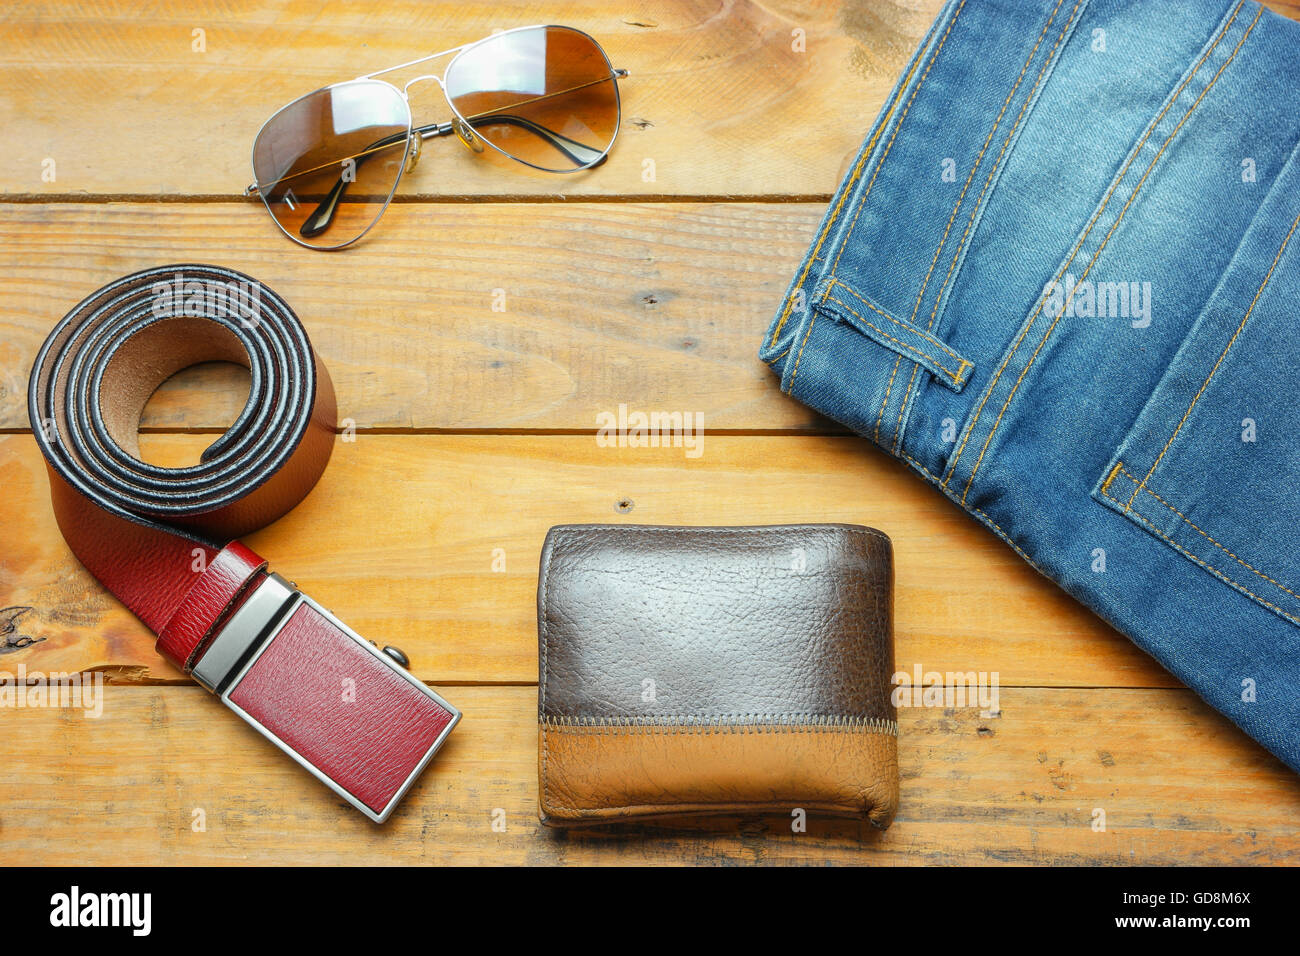 https://c8.alamy.com/comp/GD8M6X/jeans-sunglasses-and-leather-belt-wallet-on-the-wooden-vintage-with-GD8M6X.jpg